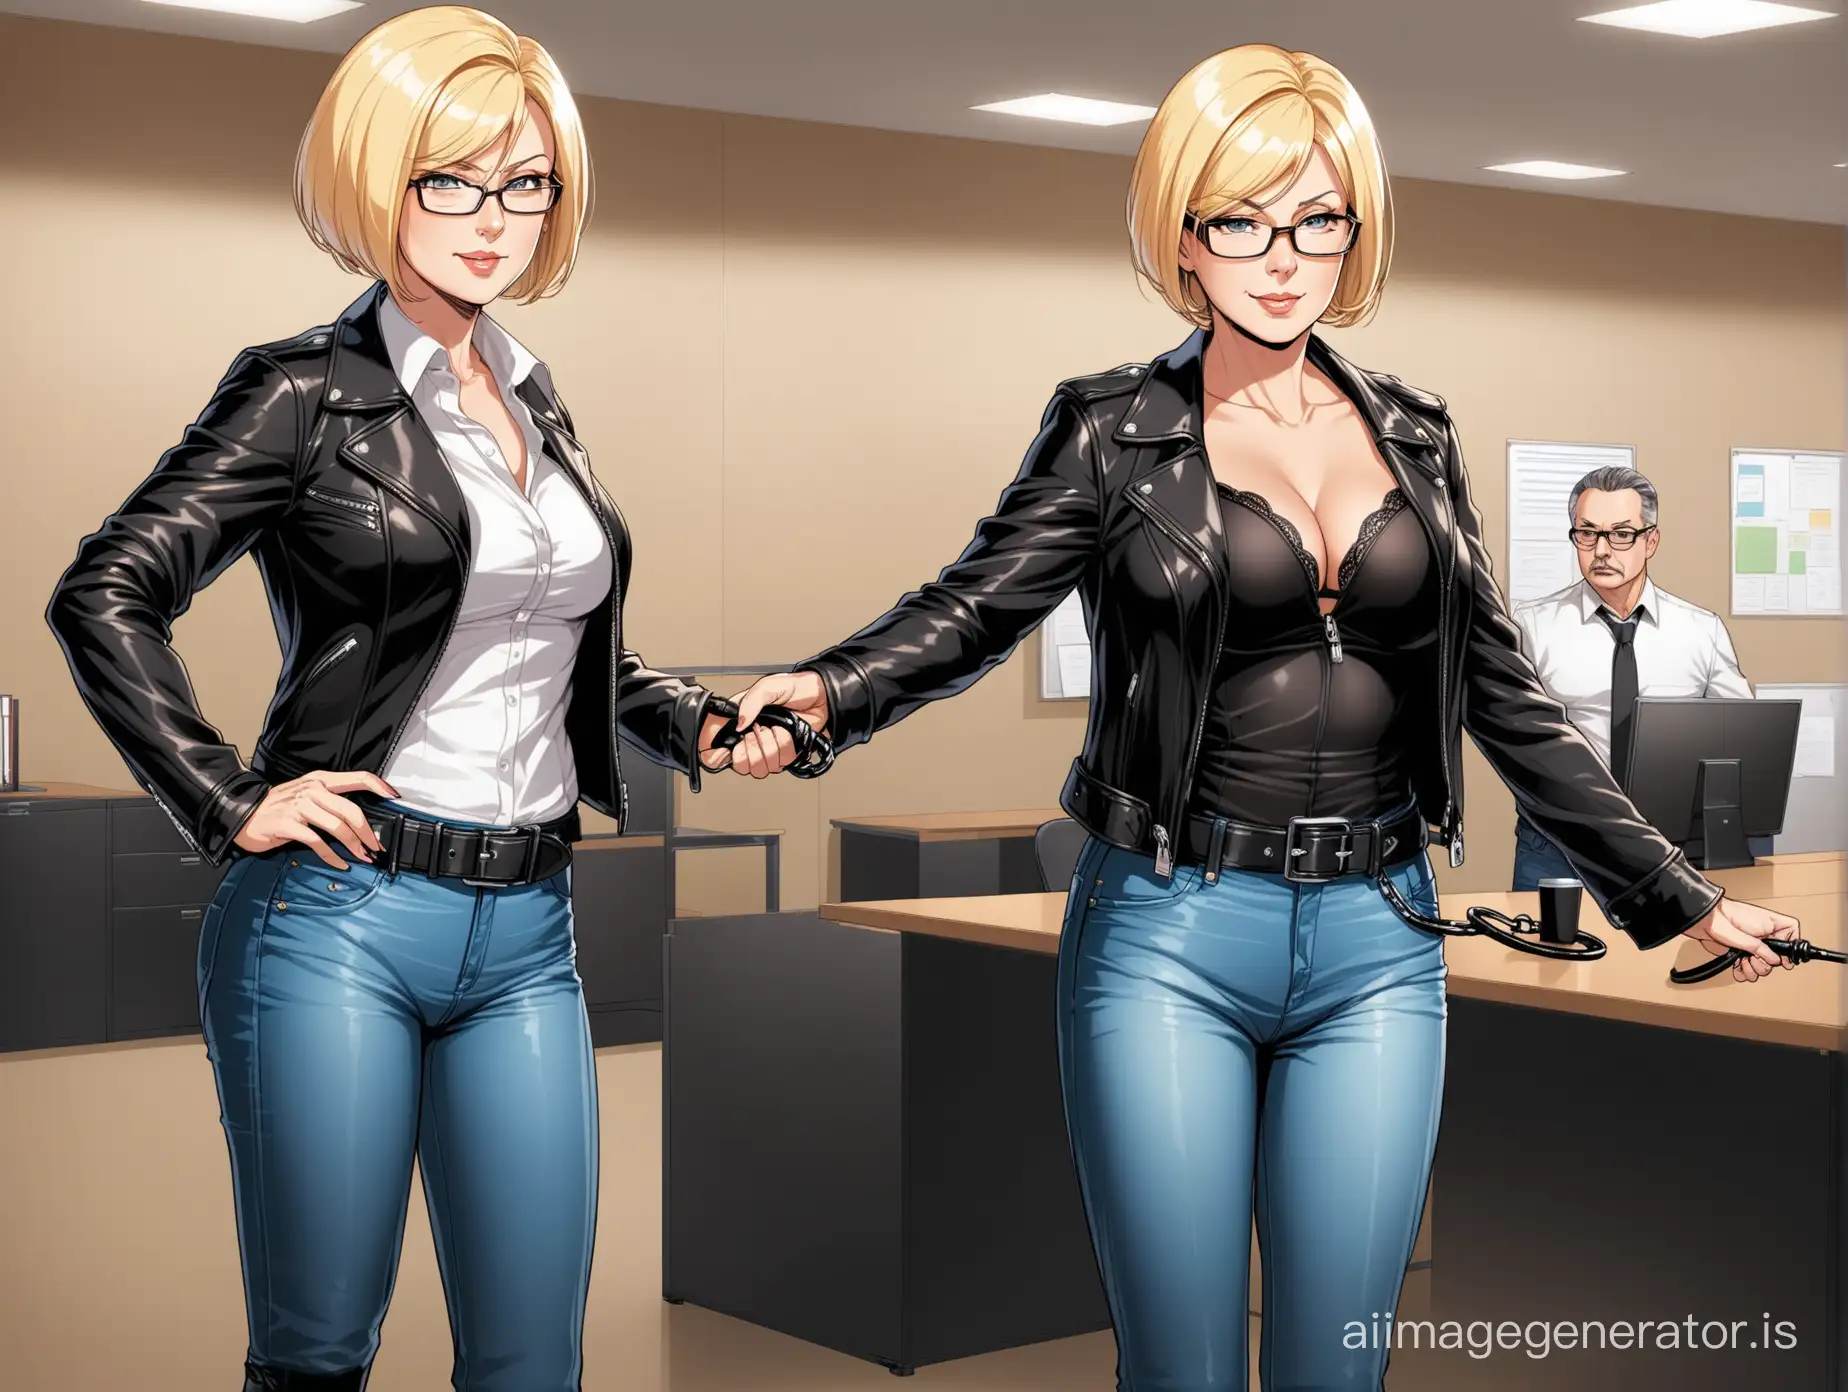 two arrogant despotic mature mistress, 55 years old, blond short hair, glasses, full open leather jacket with black bra, jeans with belt, standing tall, hold a whip in her right hand, knee high boots, in a office together with co-worker